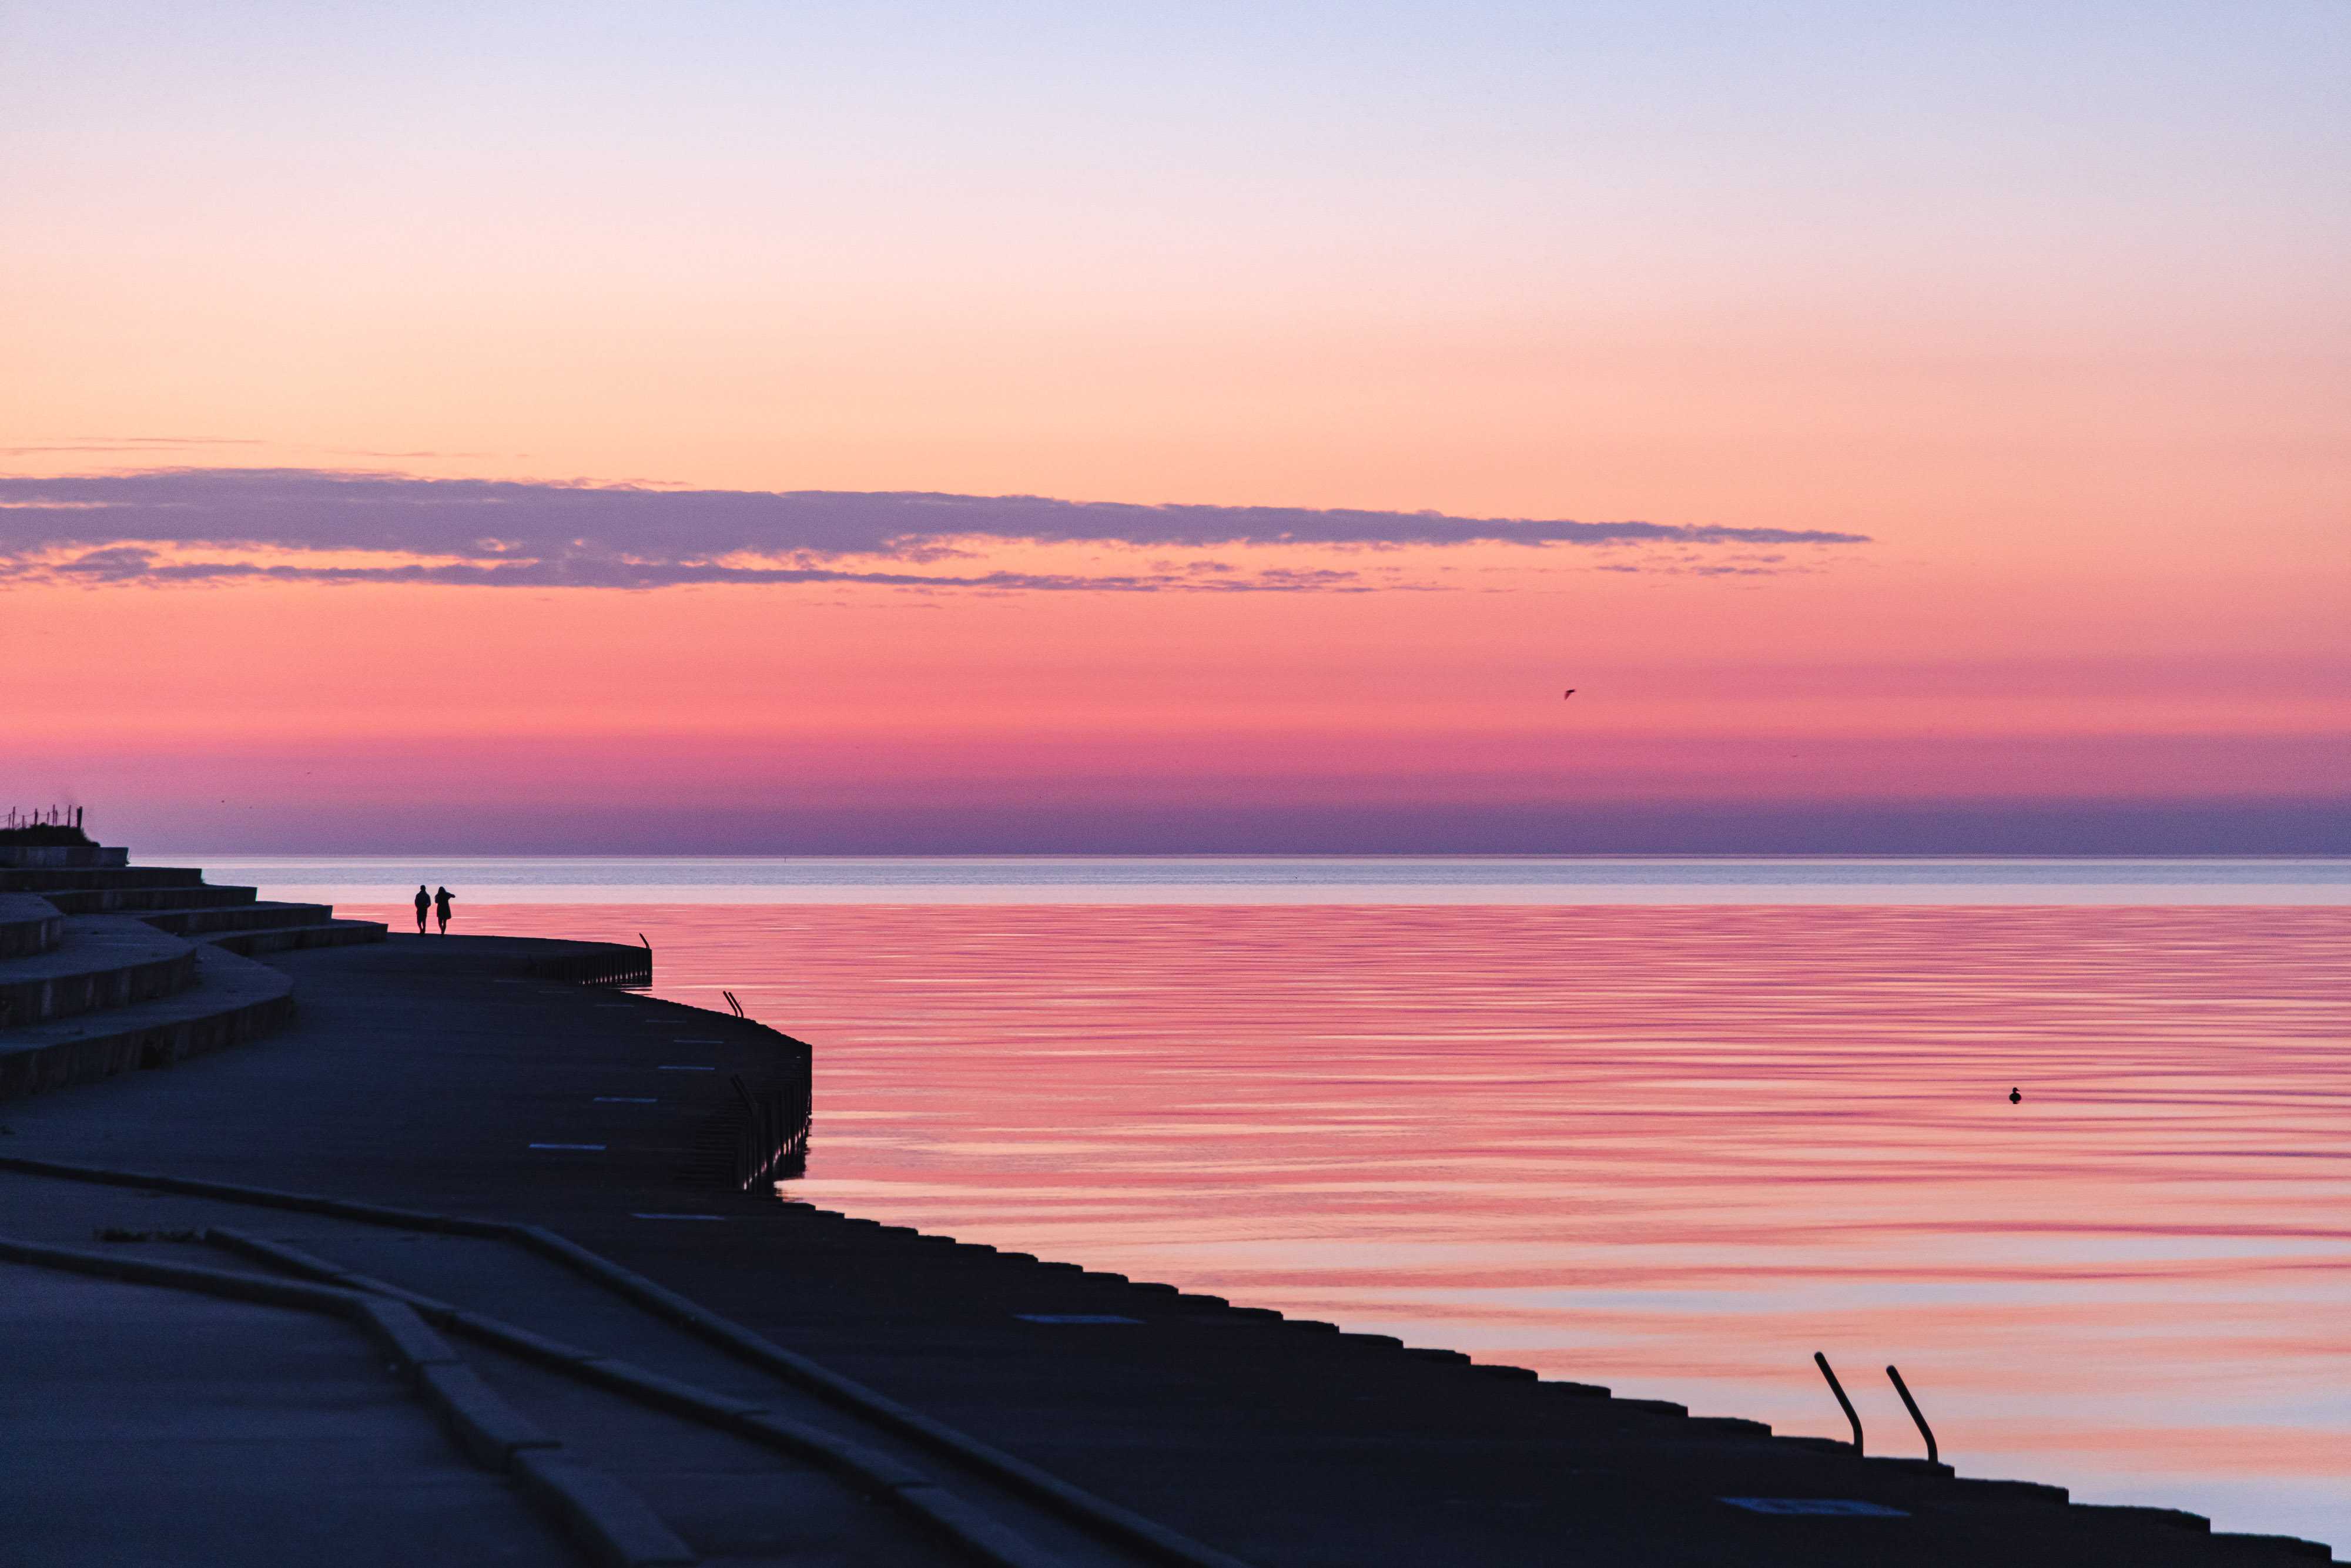 The sky is filled with orange and pink tones, blending smoothly into the gentle waves of Lake Michigan where water meets sky. To the left of the image, the silouhette of a couple walking into the sunrise along the sharp lines of the concrete revetments that line the lakeshore. 